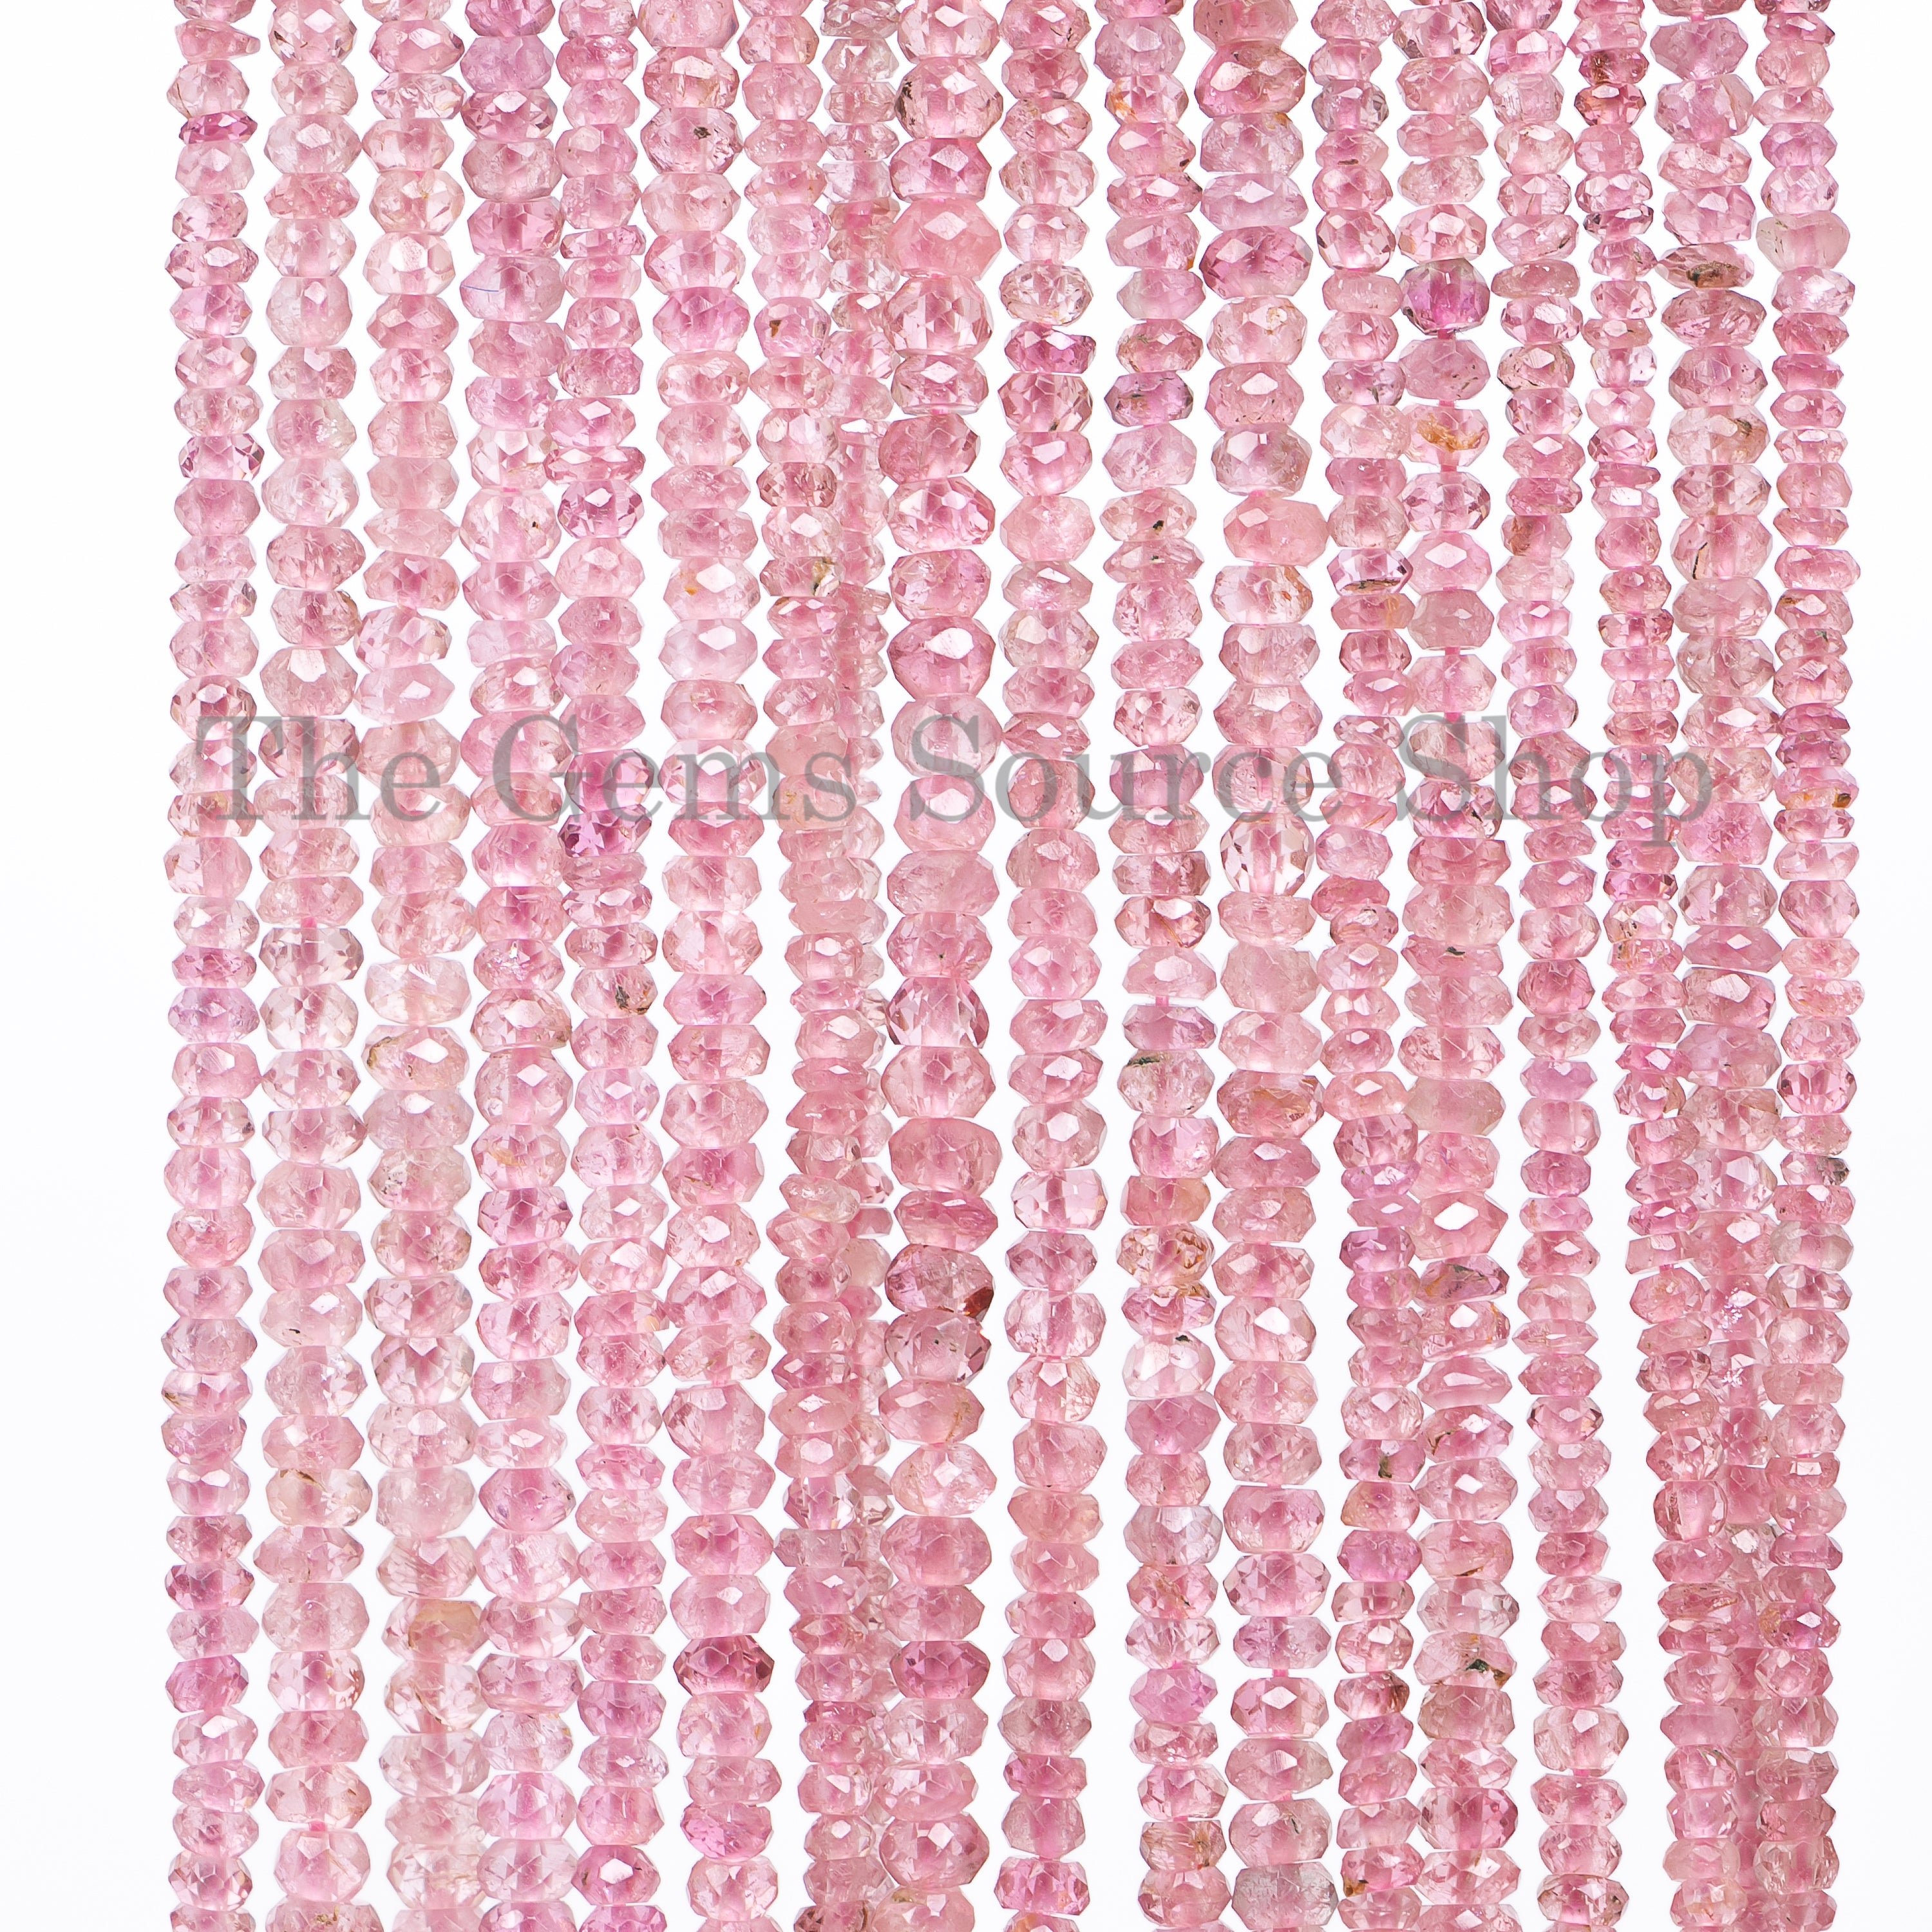 2.5-3.25 mm Pink Tourmaline Faceted Rondelle Beads TGS-4732